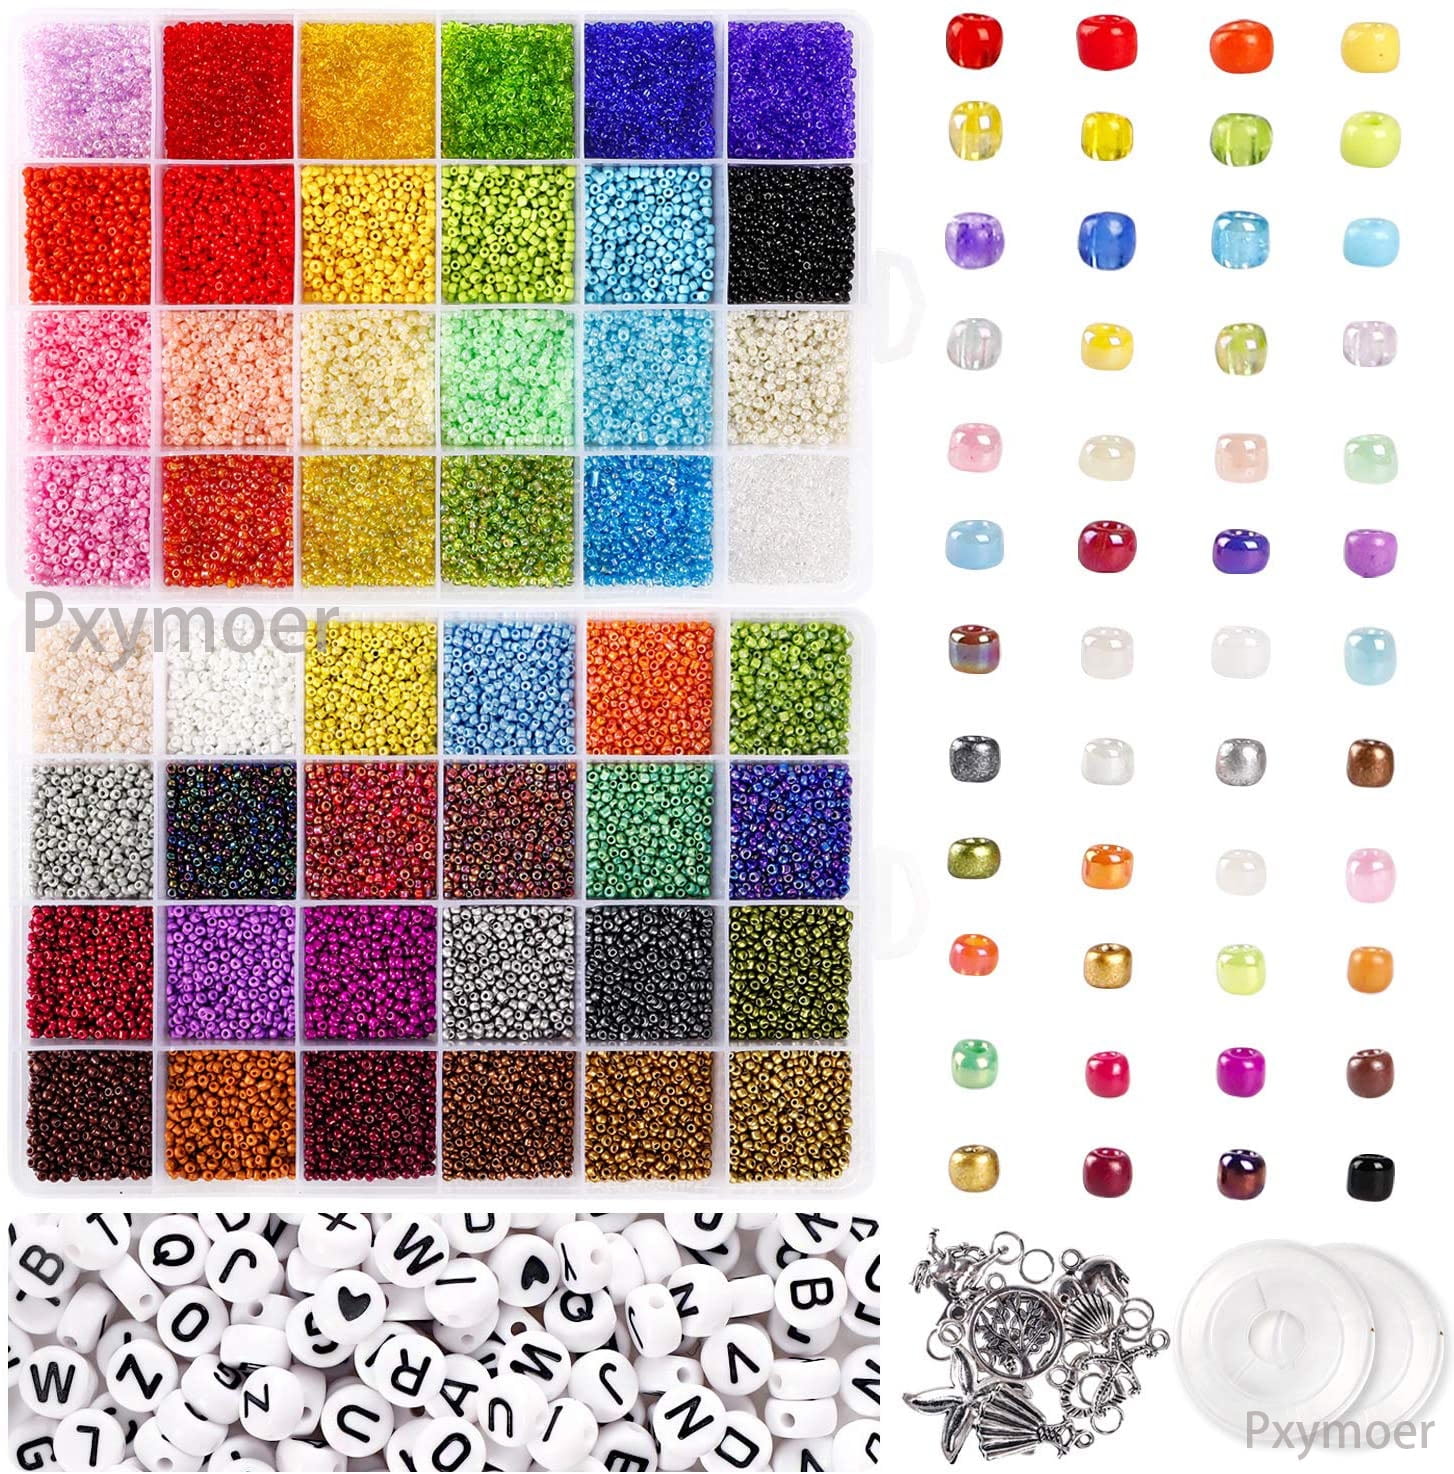 Gacuyi Glass Beads for Jewelry Making Kit, 7200pcs Bracelet Beads,2mm Seed Beads Set for Necklace,Pendant,Earring DIY Making Accessories,Round Beads for